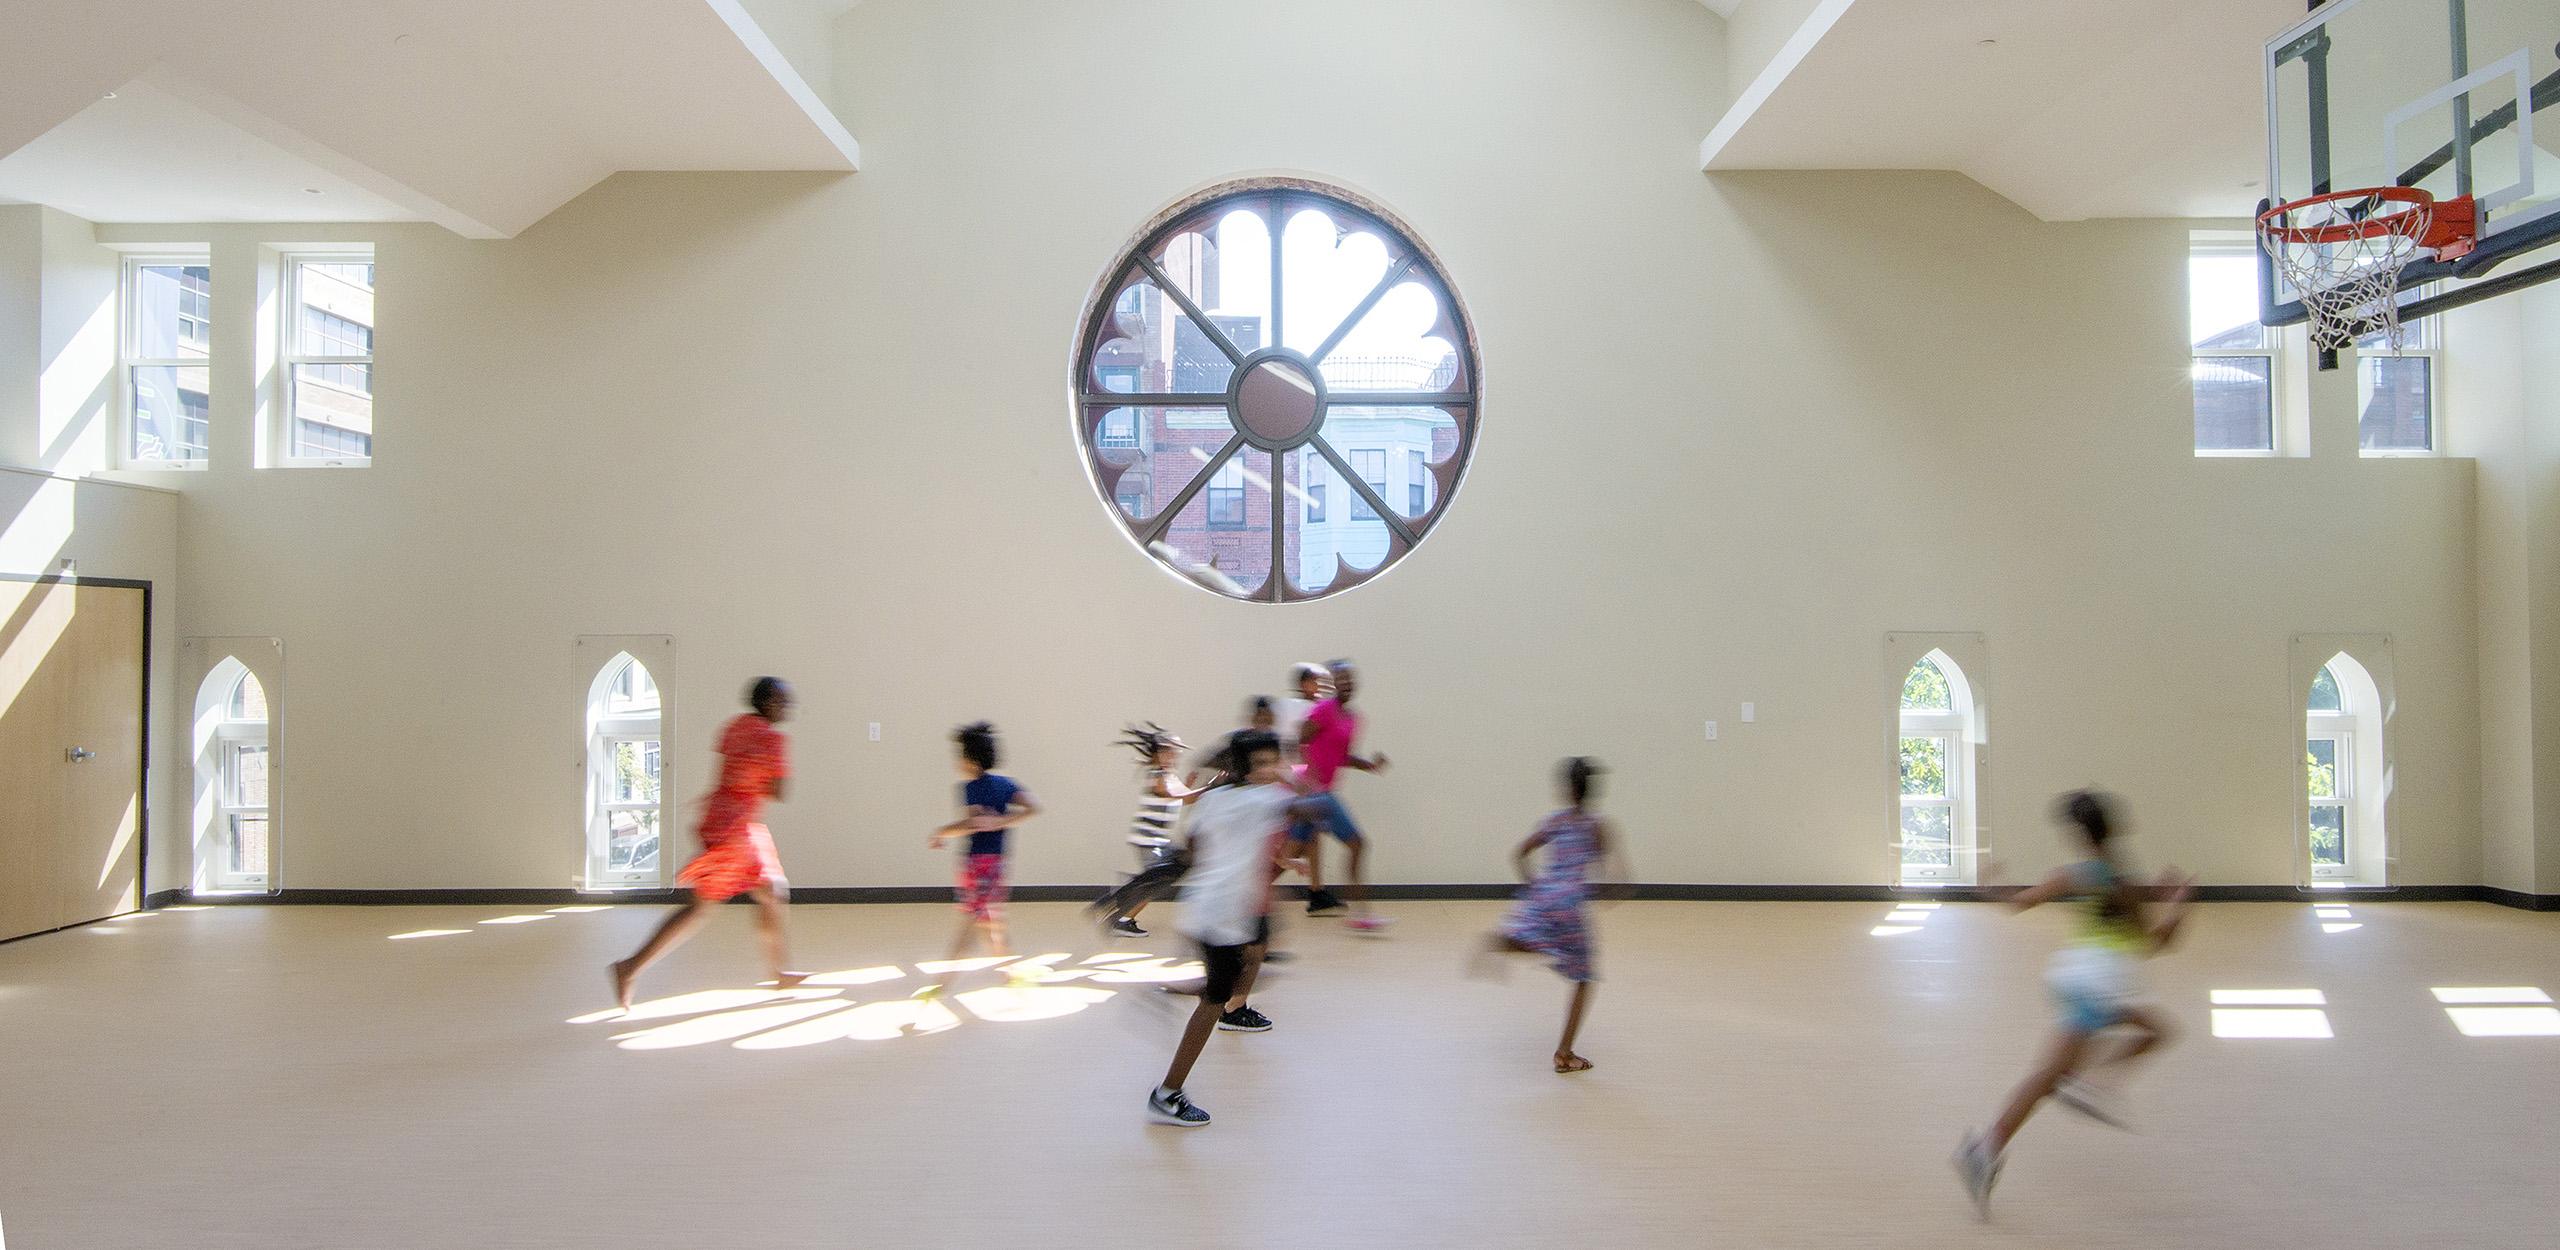 Adaptive reuse of an historic church into childcare space/gymnasium